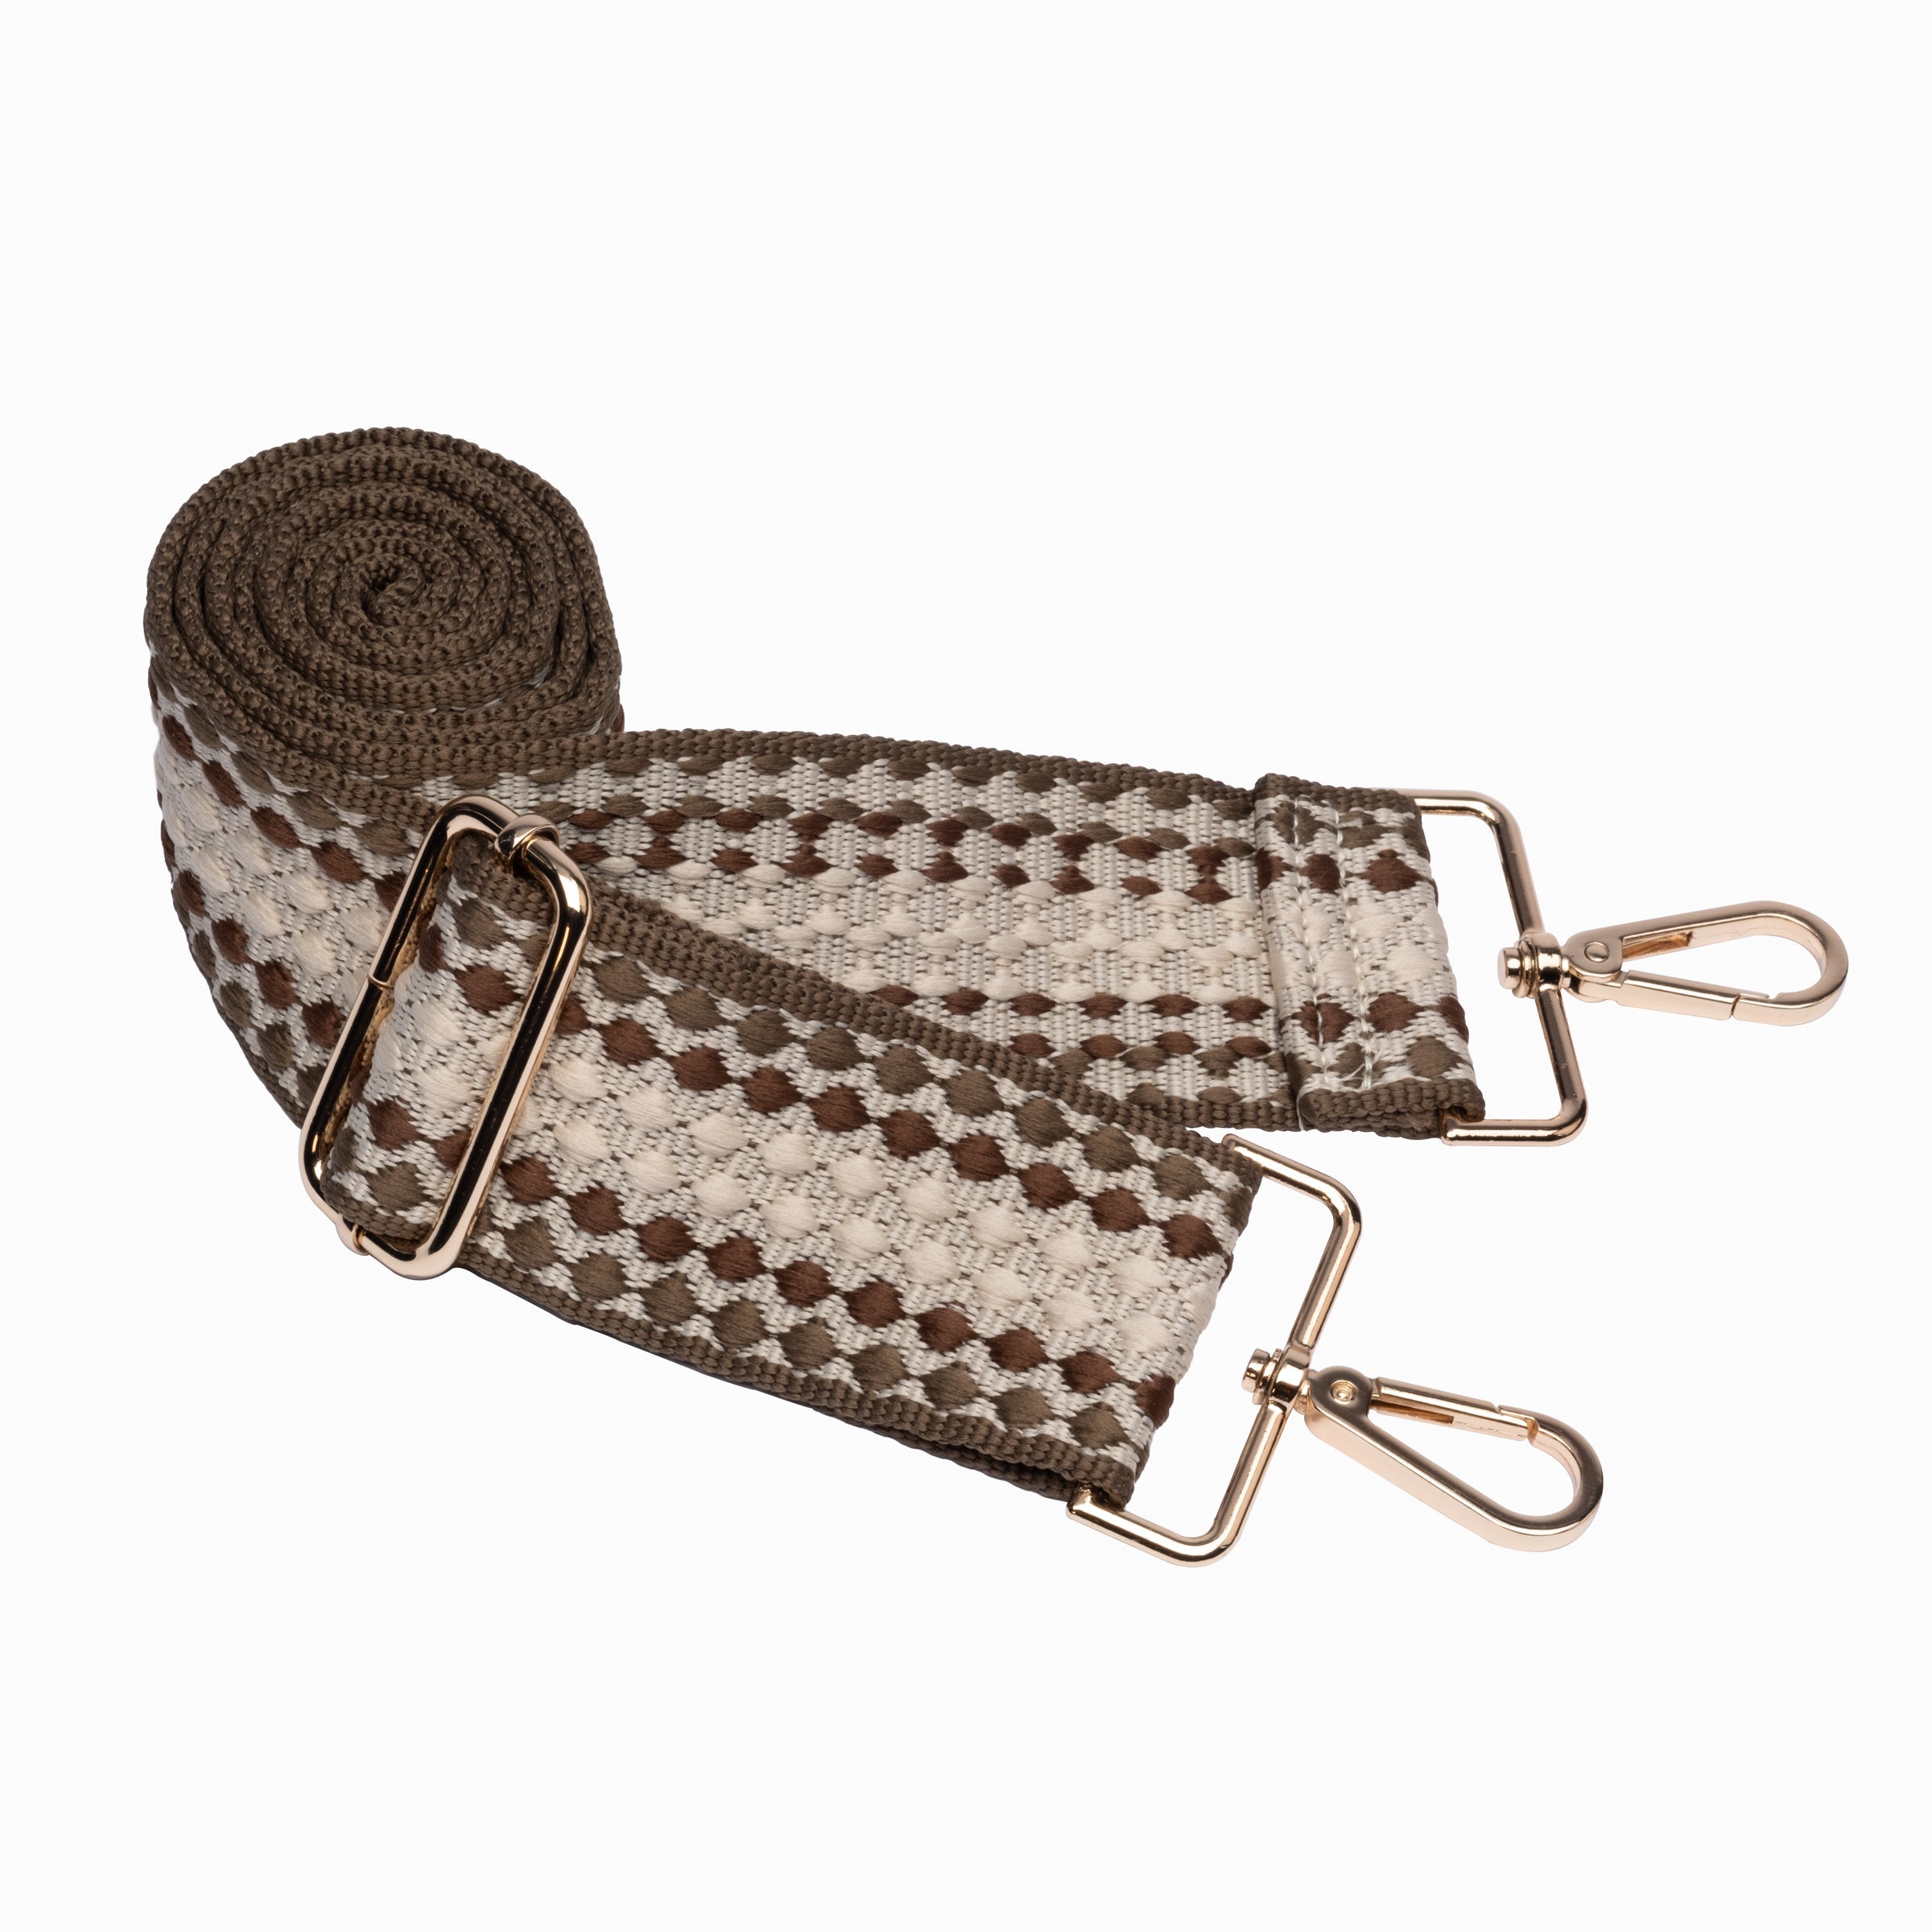 Wholesale - Chocolate Patterned Strap With Gold Hardware